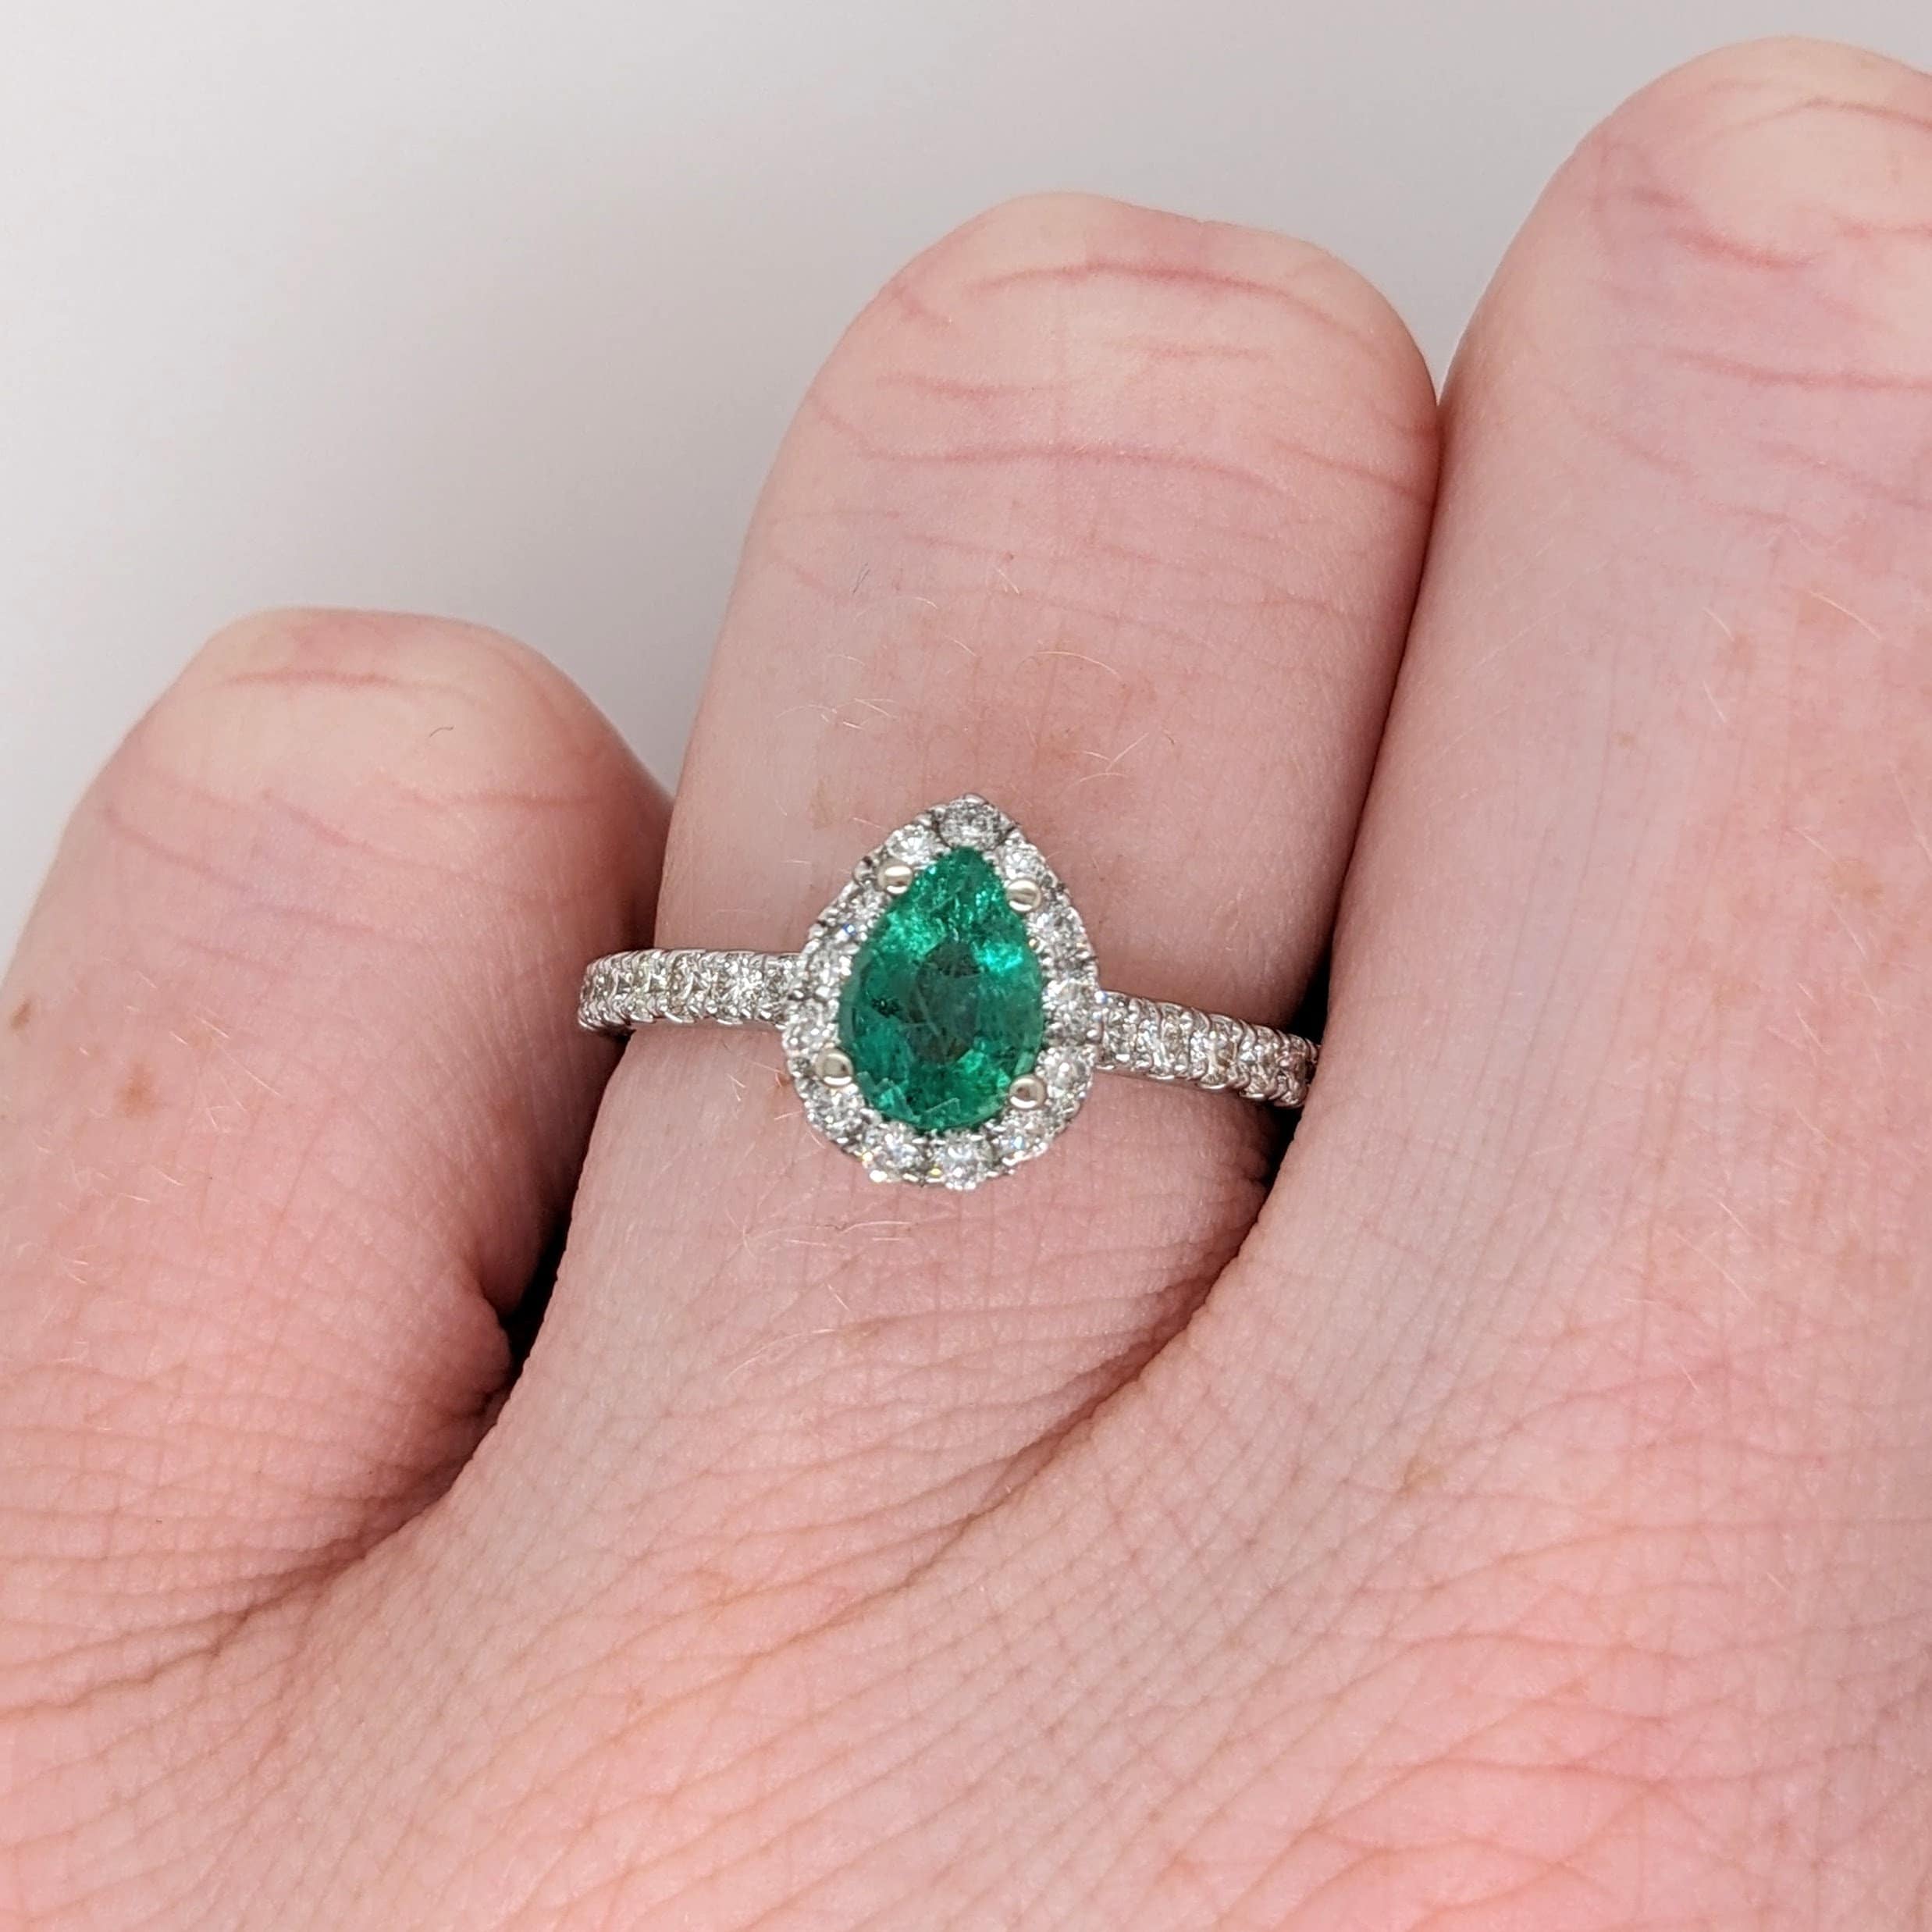 Pretty Emerald Ring in 14K Solid White Gold w a Natural Diamond Halo | Pear Cut 7x5mm | Engagement Ring | Statement Ring | May Birthstone |